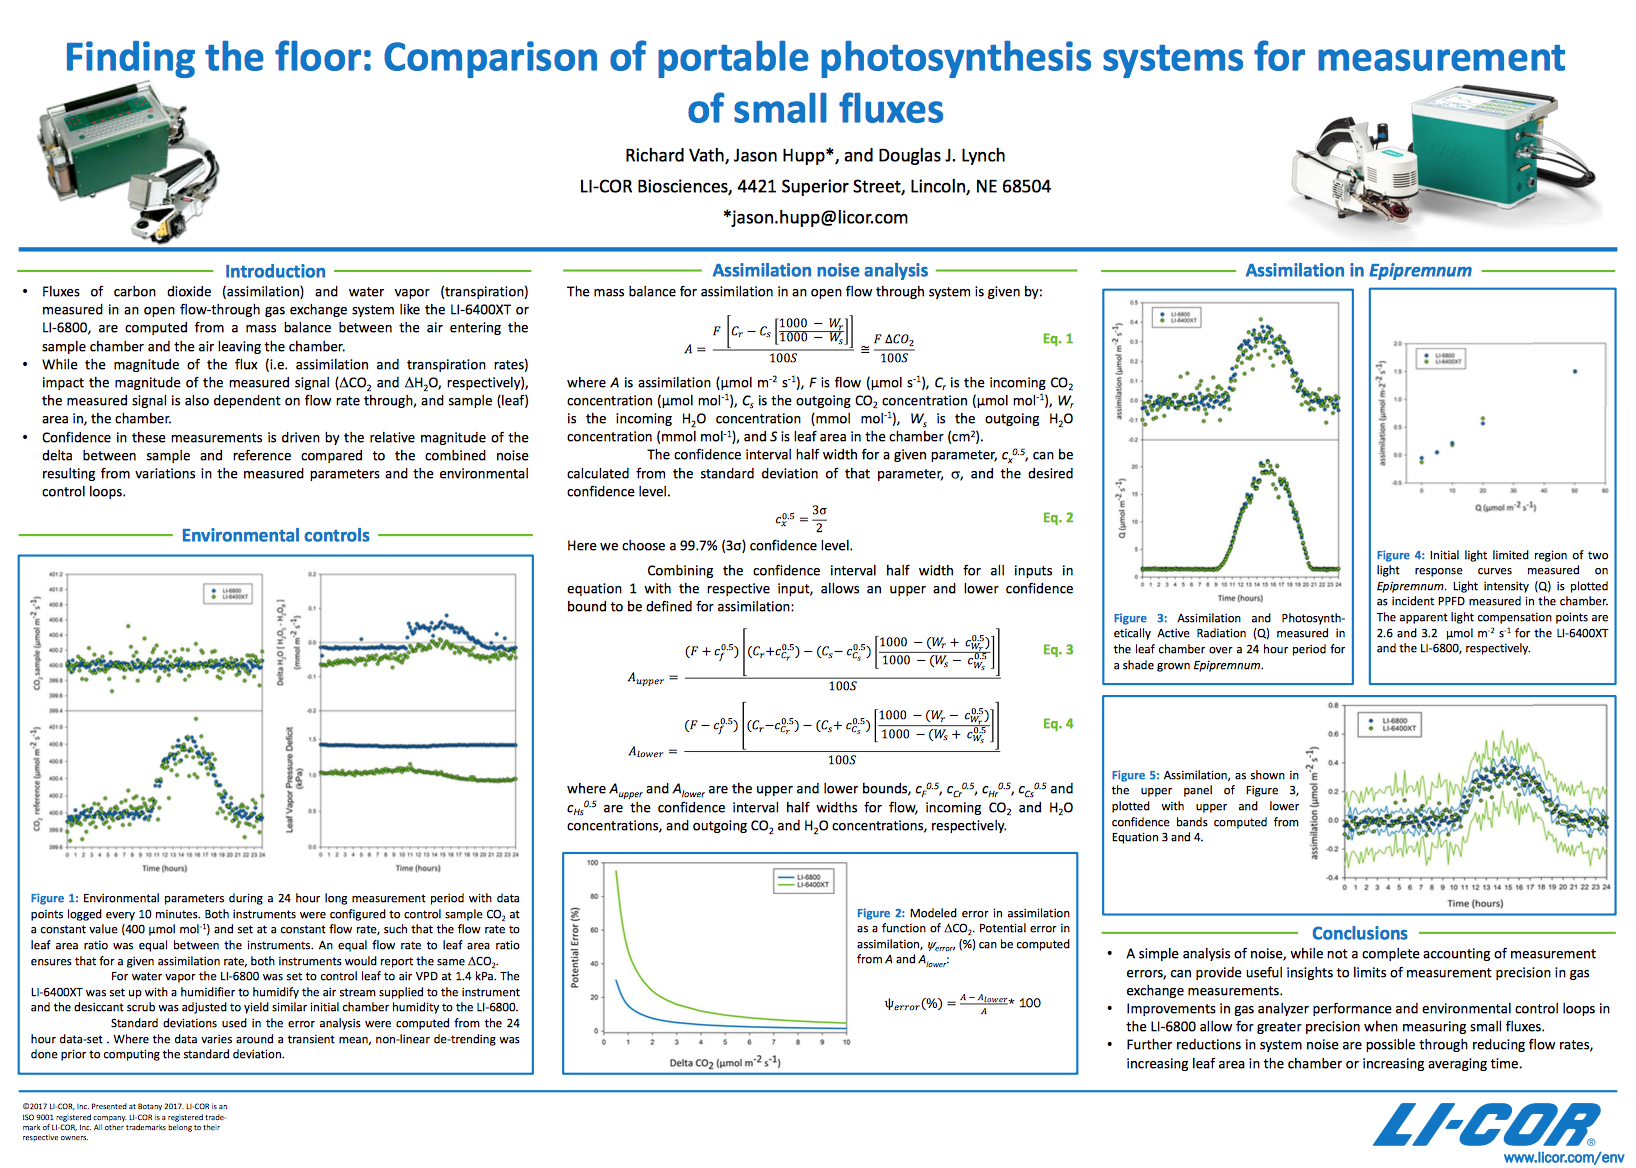 Finding the floor: Comparison of portable photosynthesis systems for measurement of small fluxes